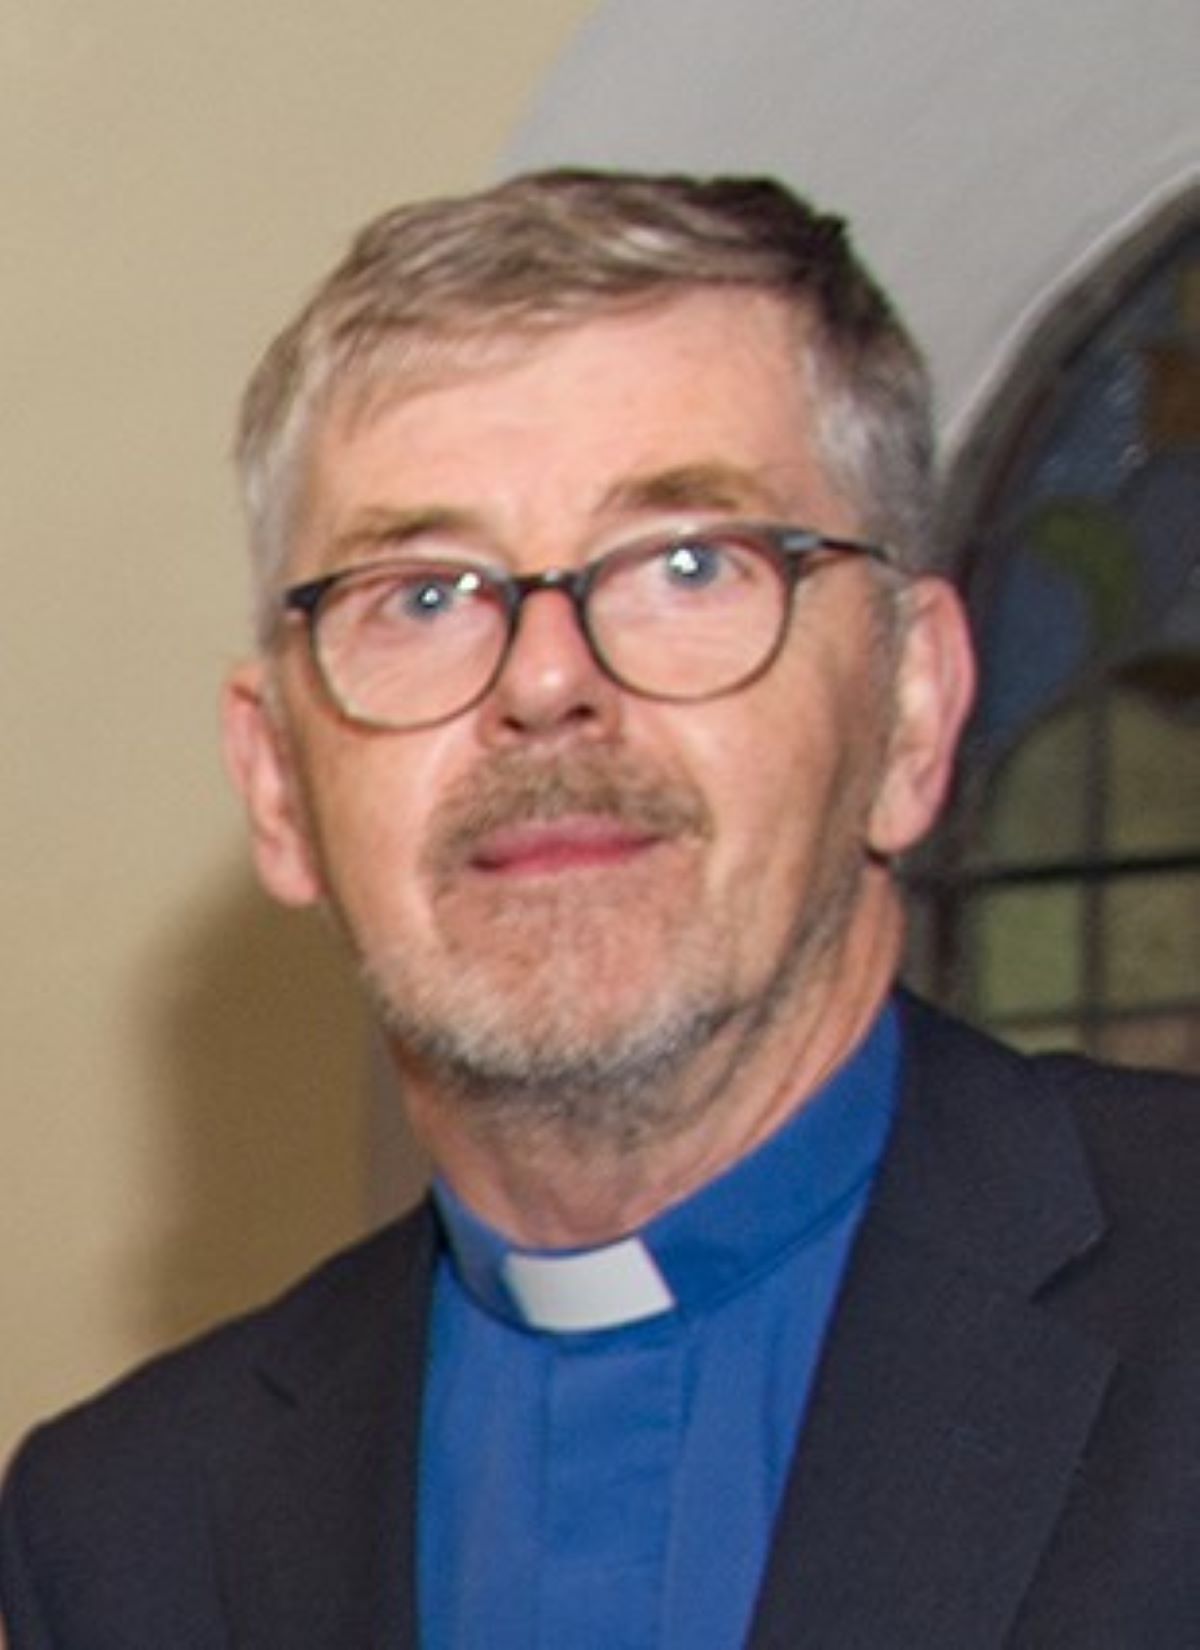 Education Authority roles for clergyman and former principal